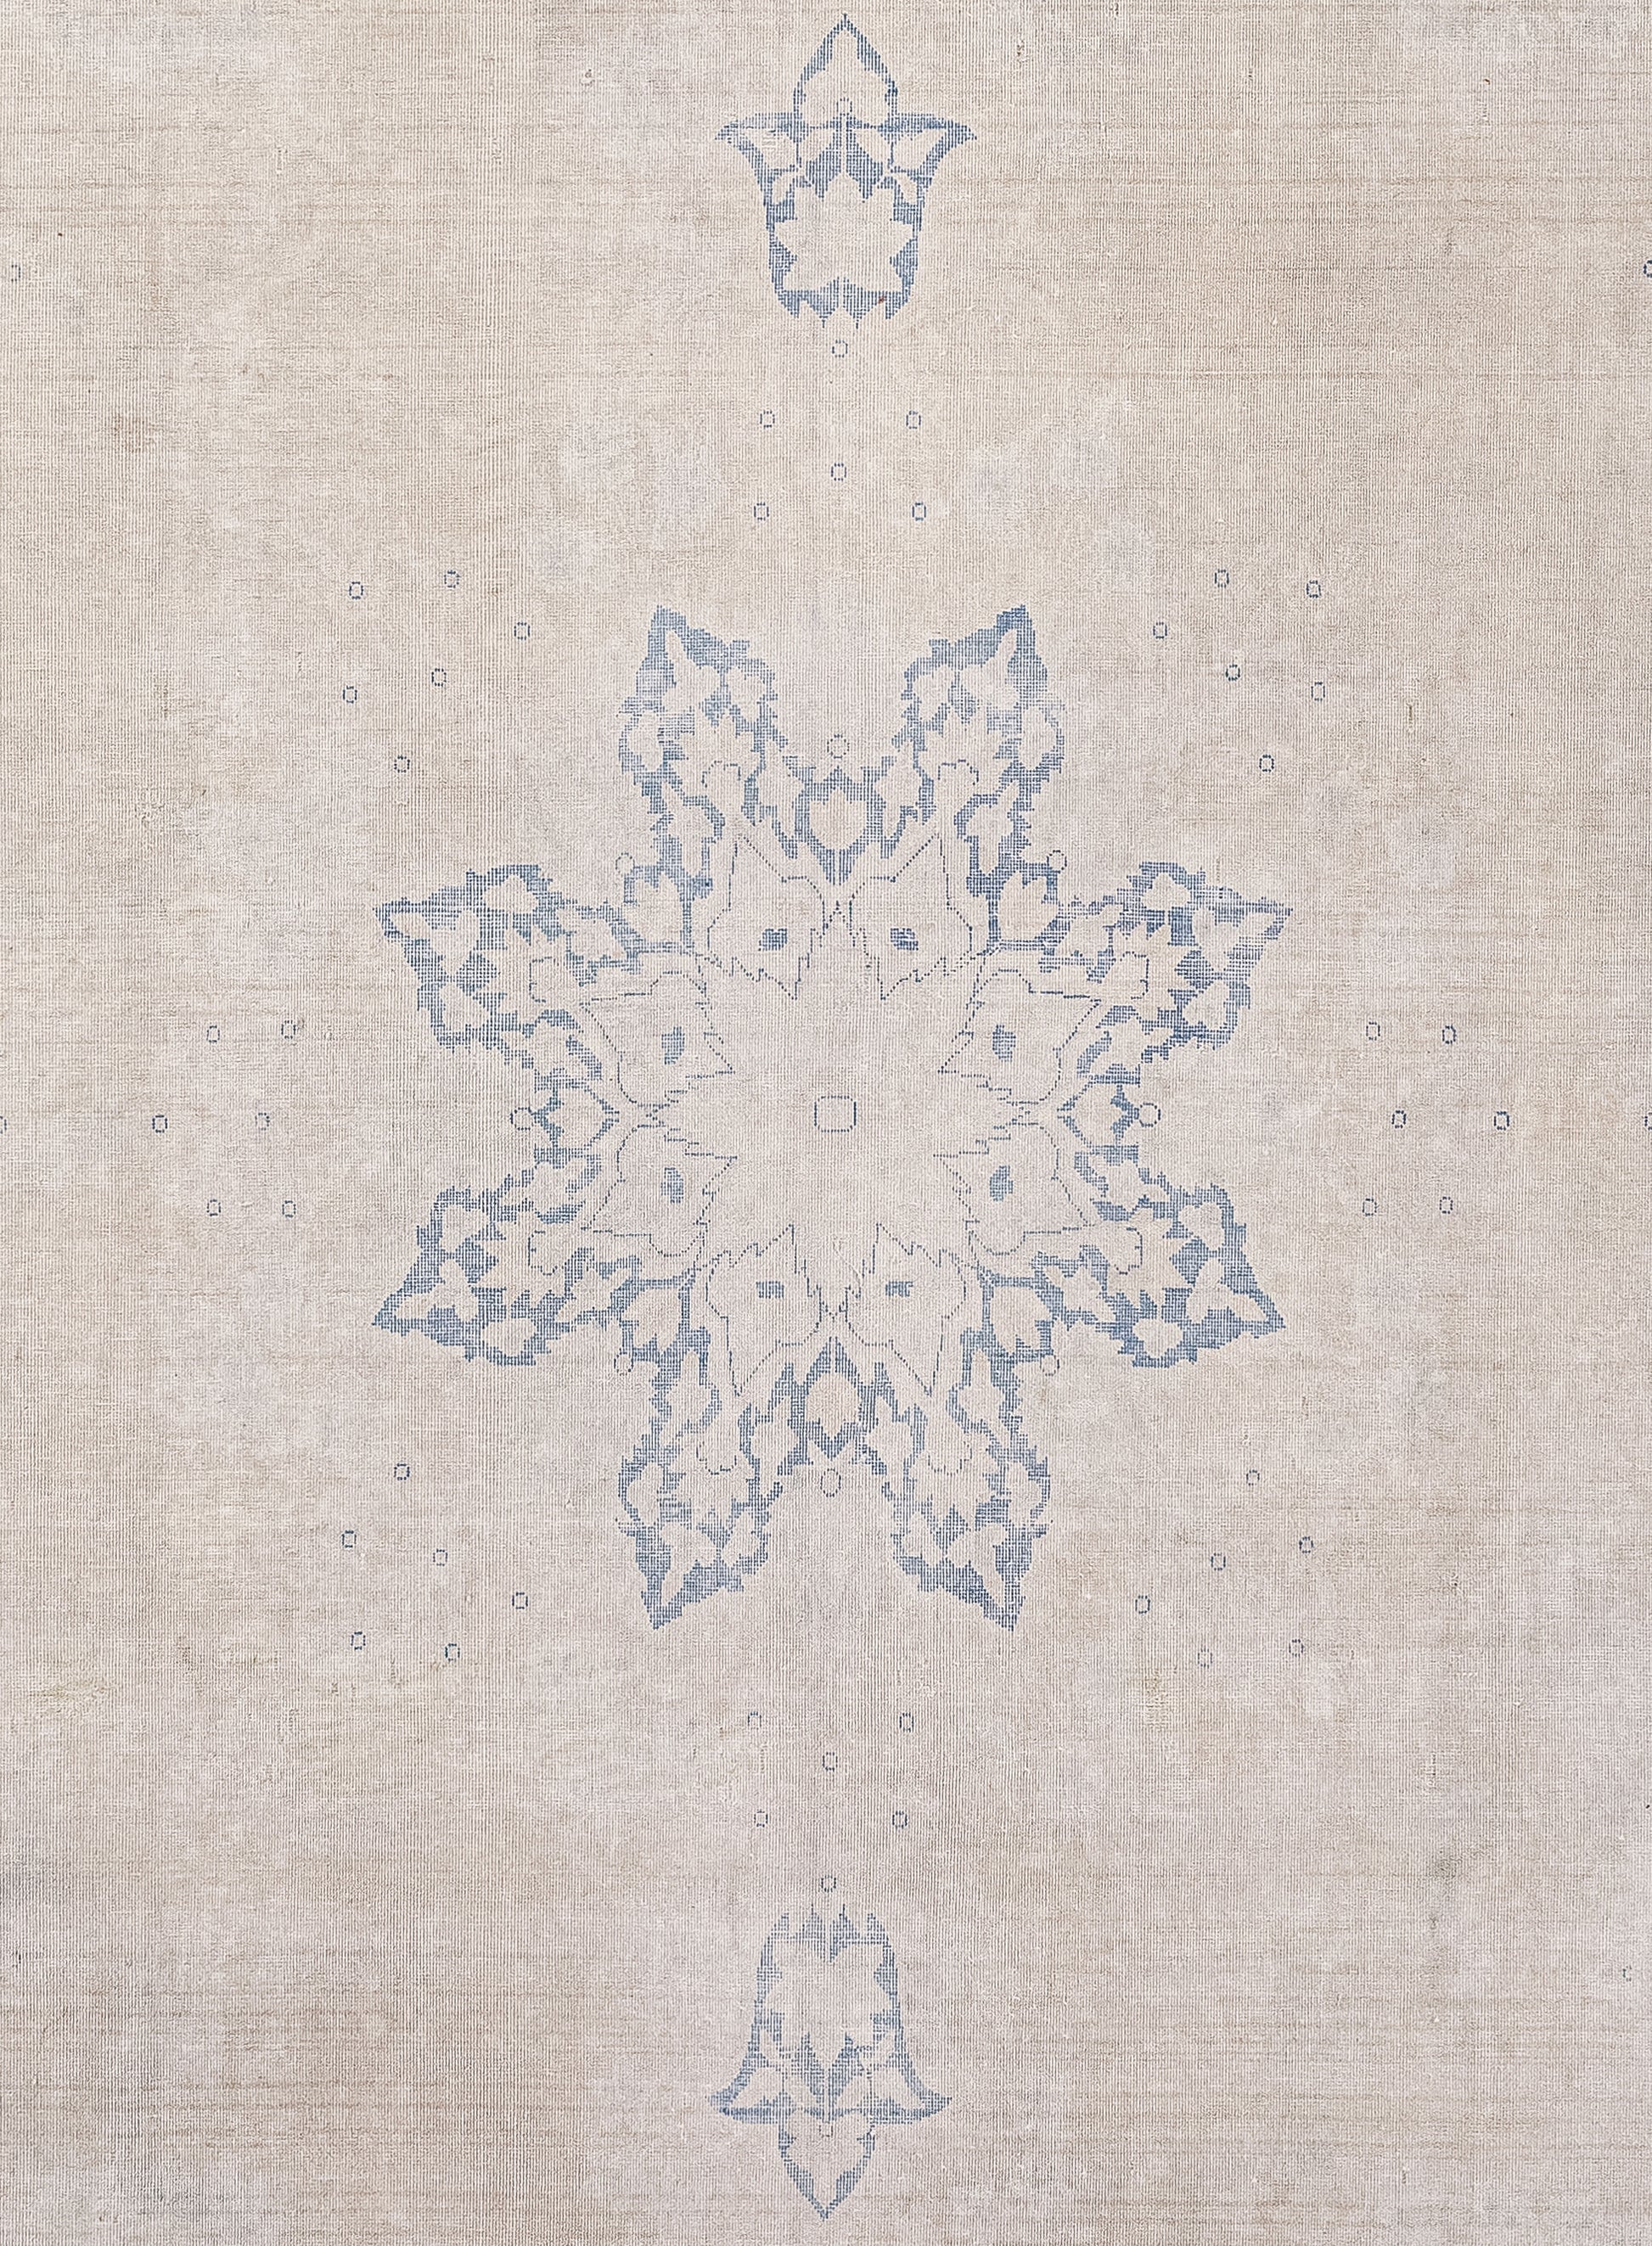 The rug's close-up features a large snowflake in the center with two heraldic fleurs-de-lis at the top and bottom in blue.